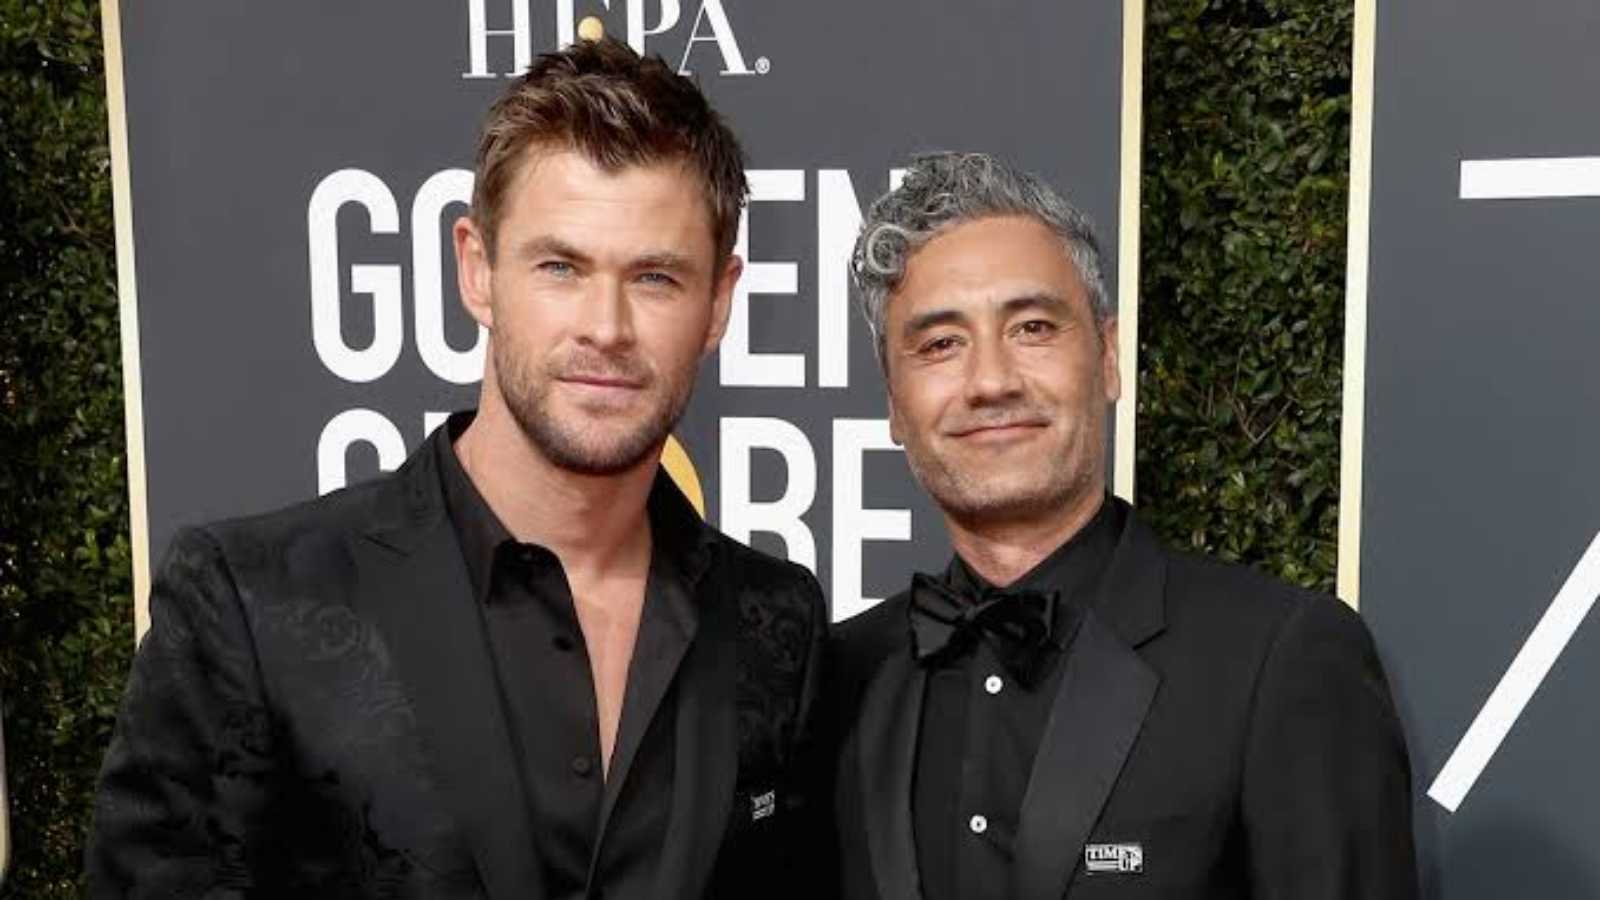 Thor and Mighty Thor team up with Taika Waititi